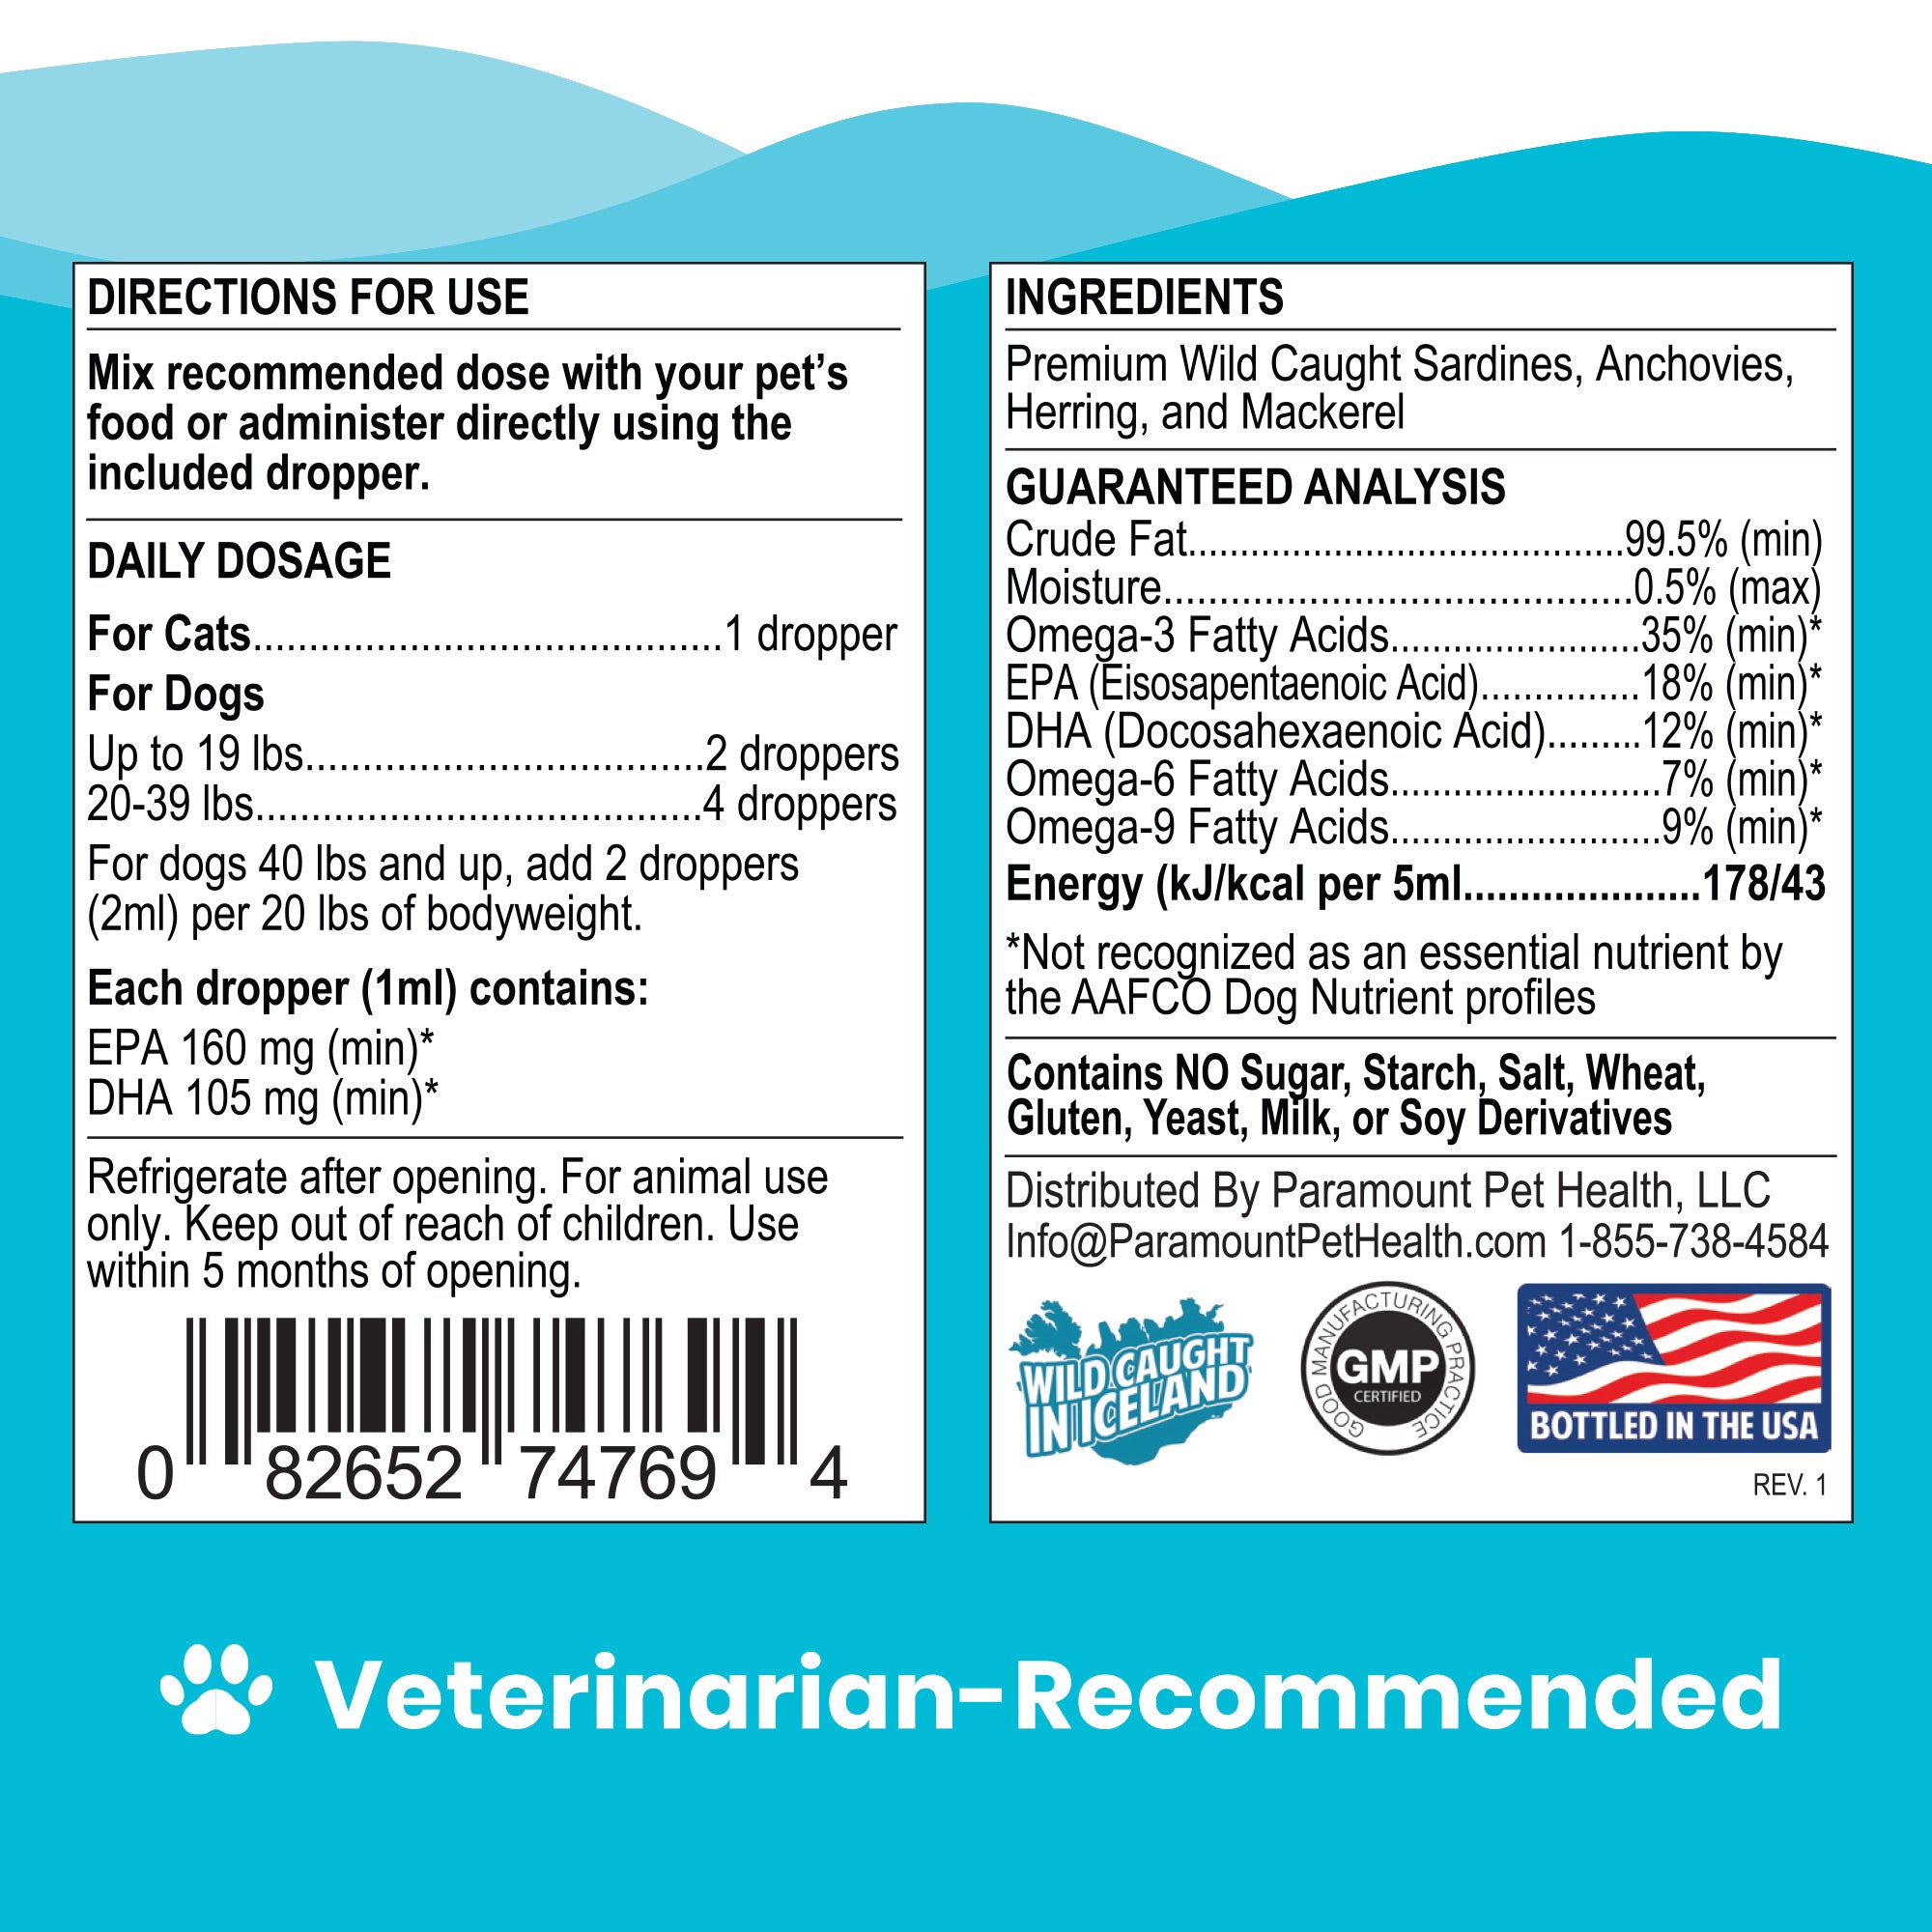 Ingredients and Dosage of Omega-3 Fish Oil for Cats and Dogs